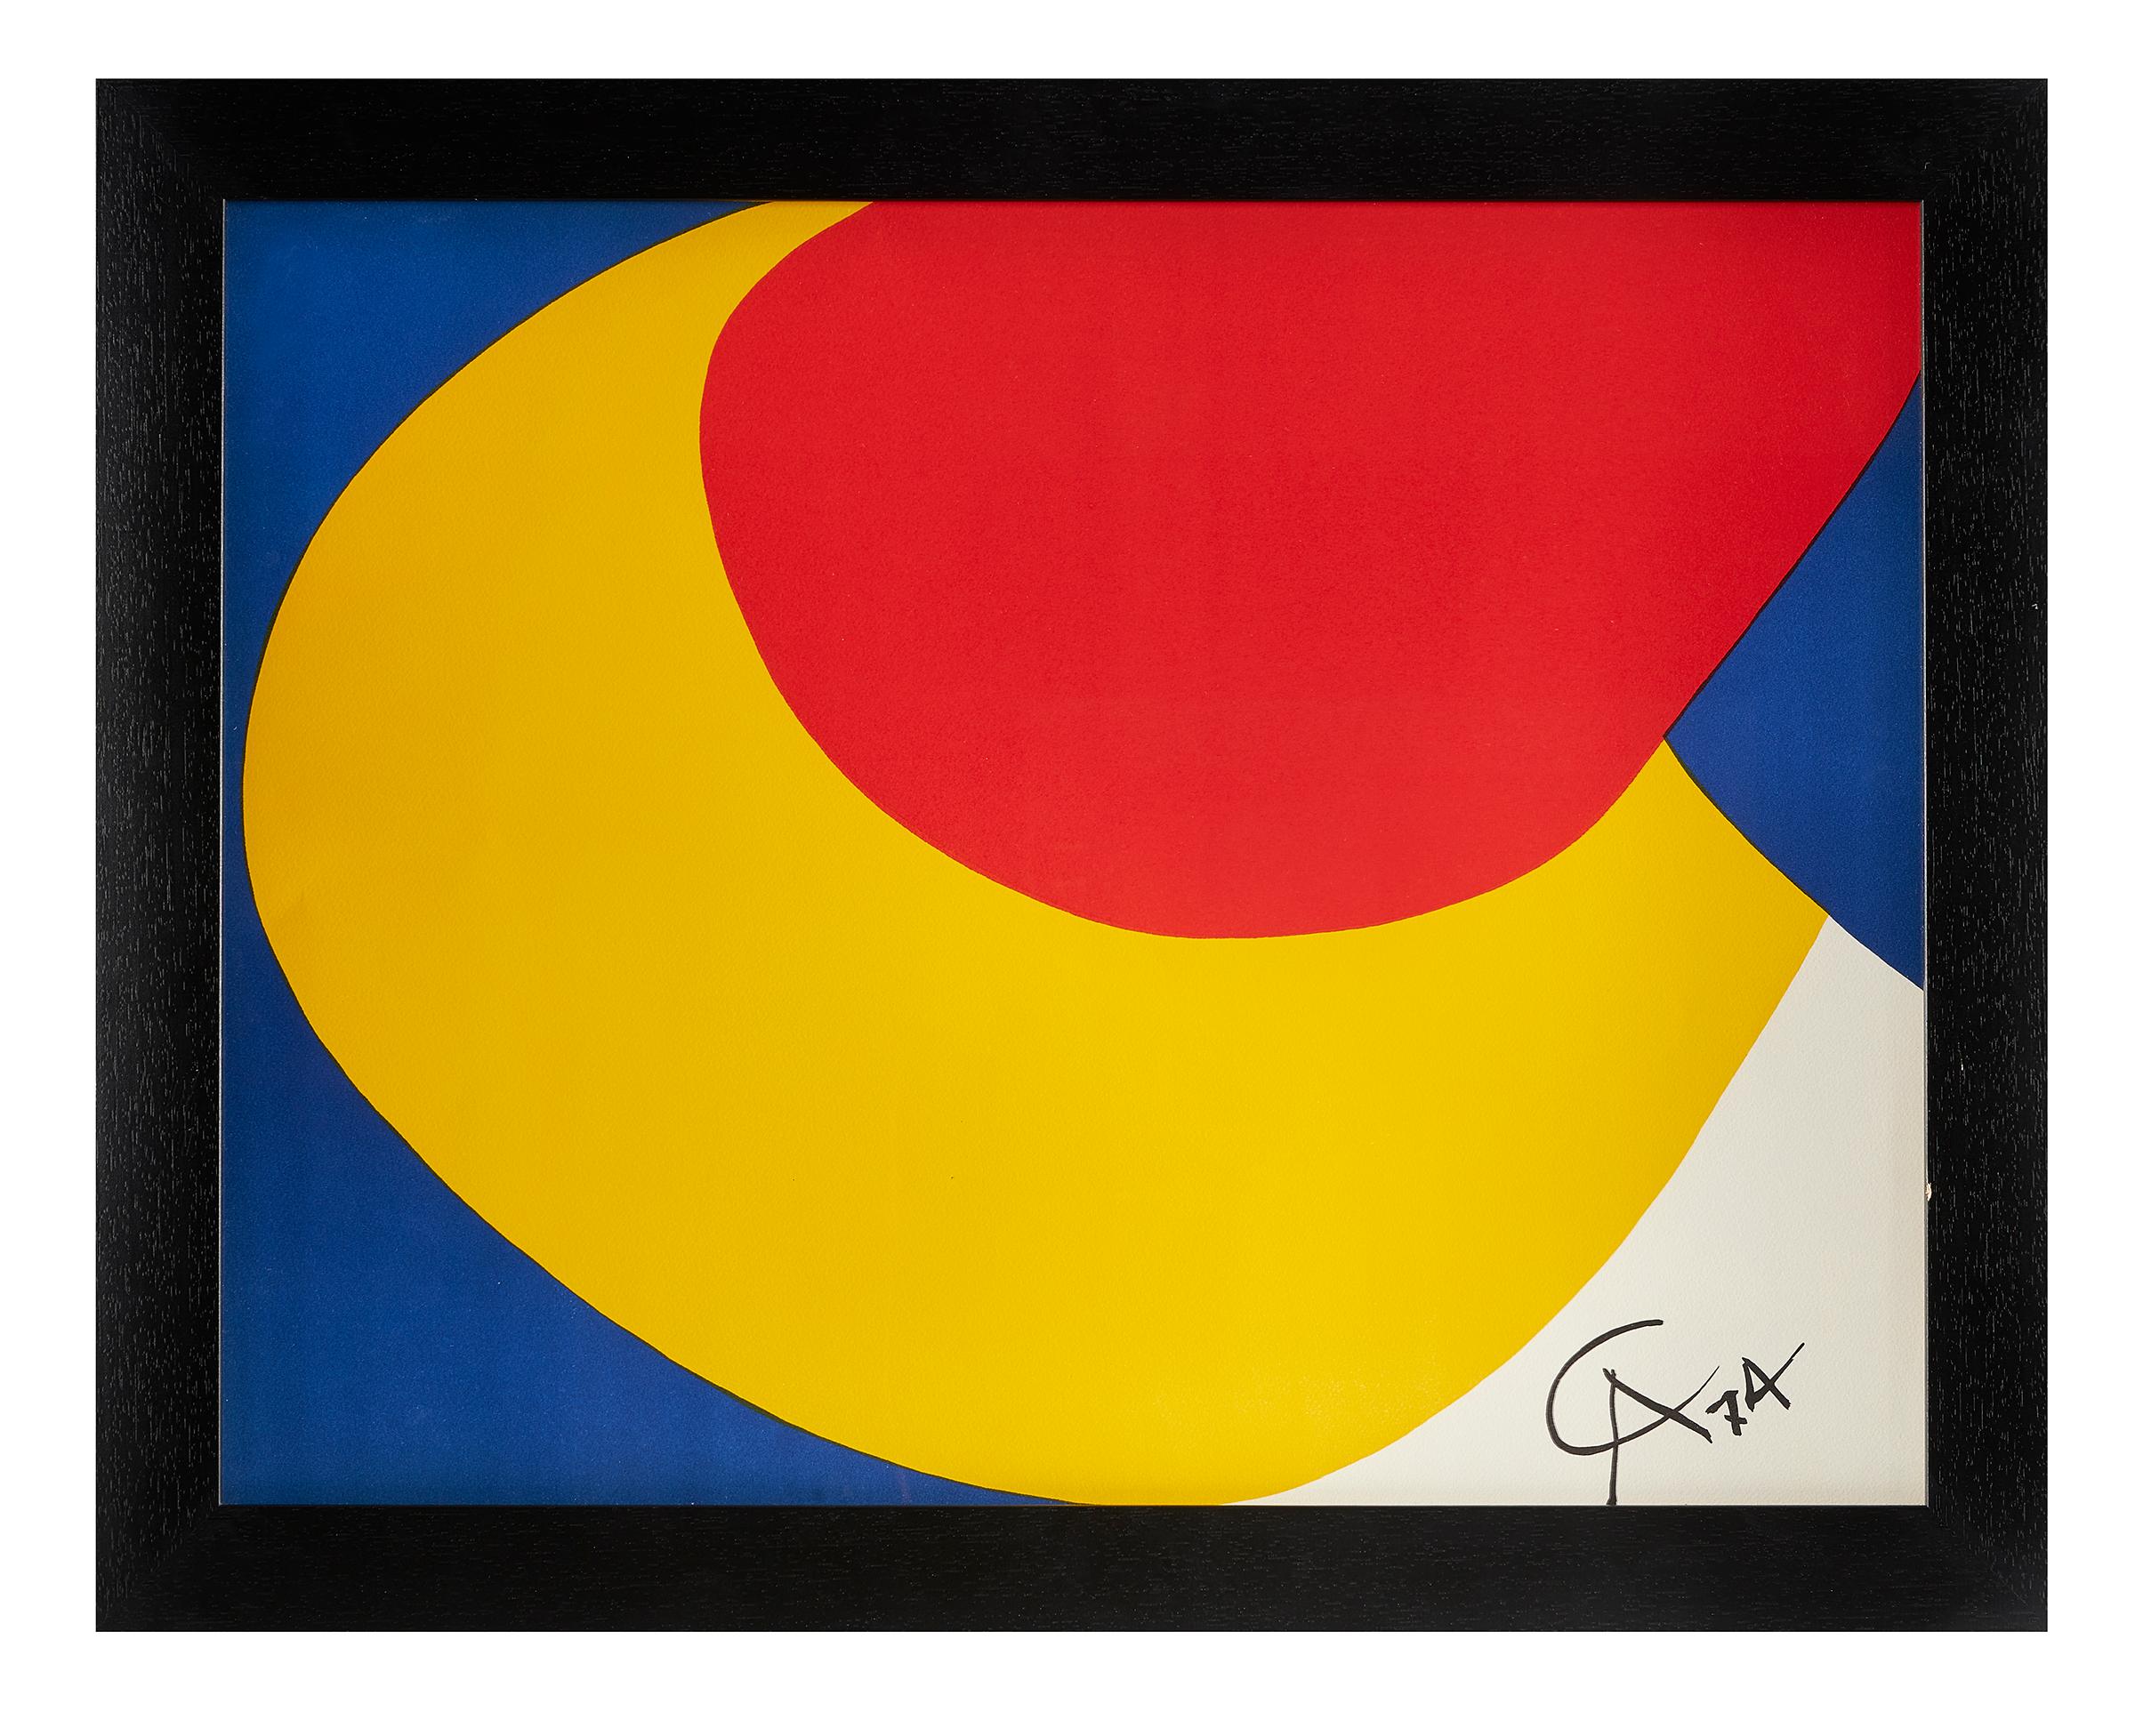 Alexander Calder (American, 1898-1976) Convection from 'Flying Colors’, Lithograph printed in colors, 1974, on wove paper with full margins printed to the edge, framed.